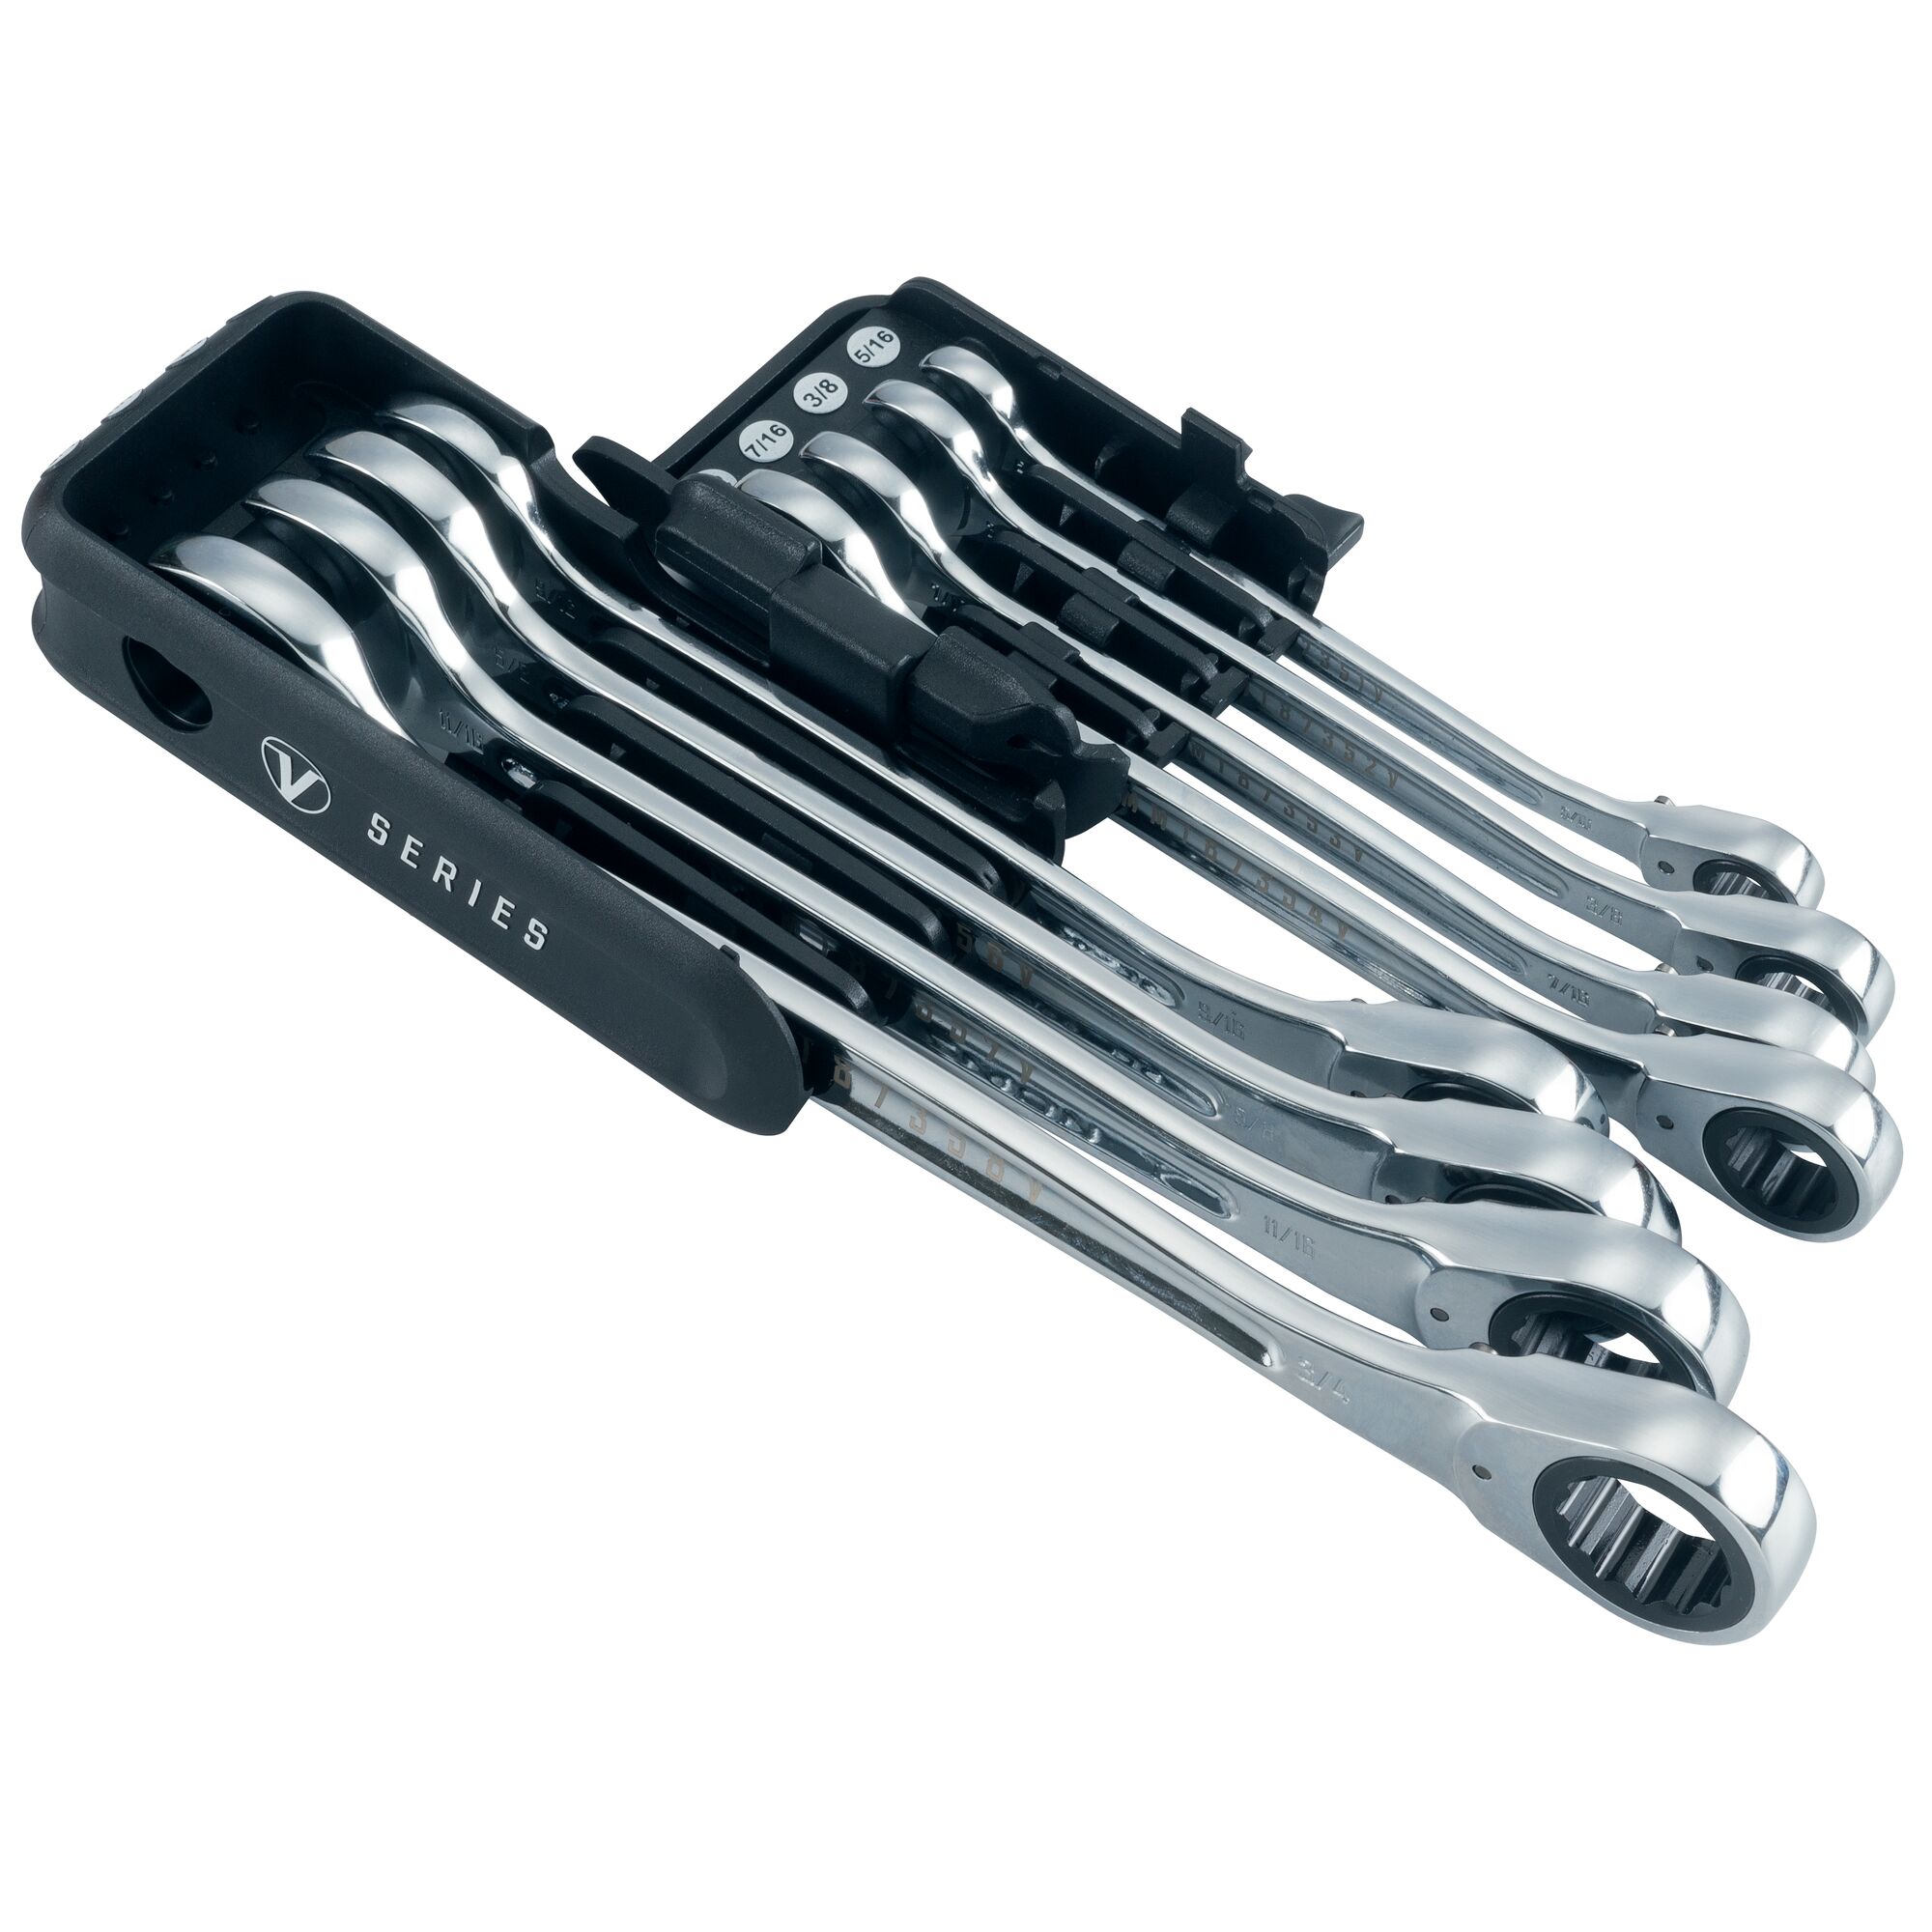 View of CRAFTSMAN Wrenches: Ratchet highlighting product features